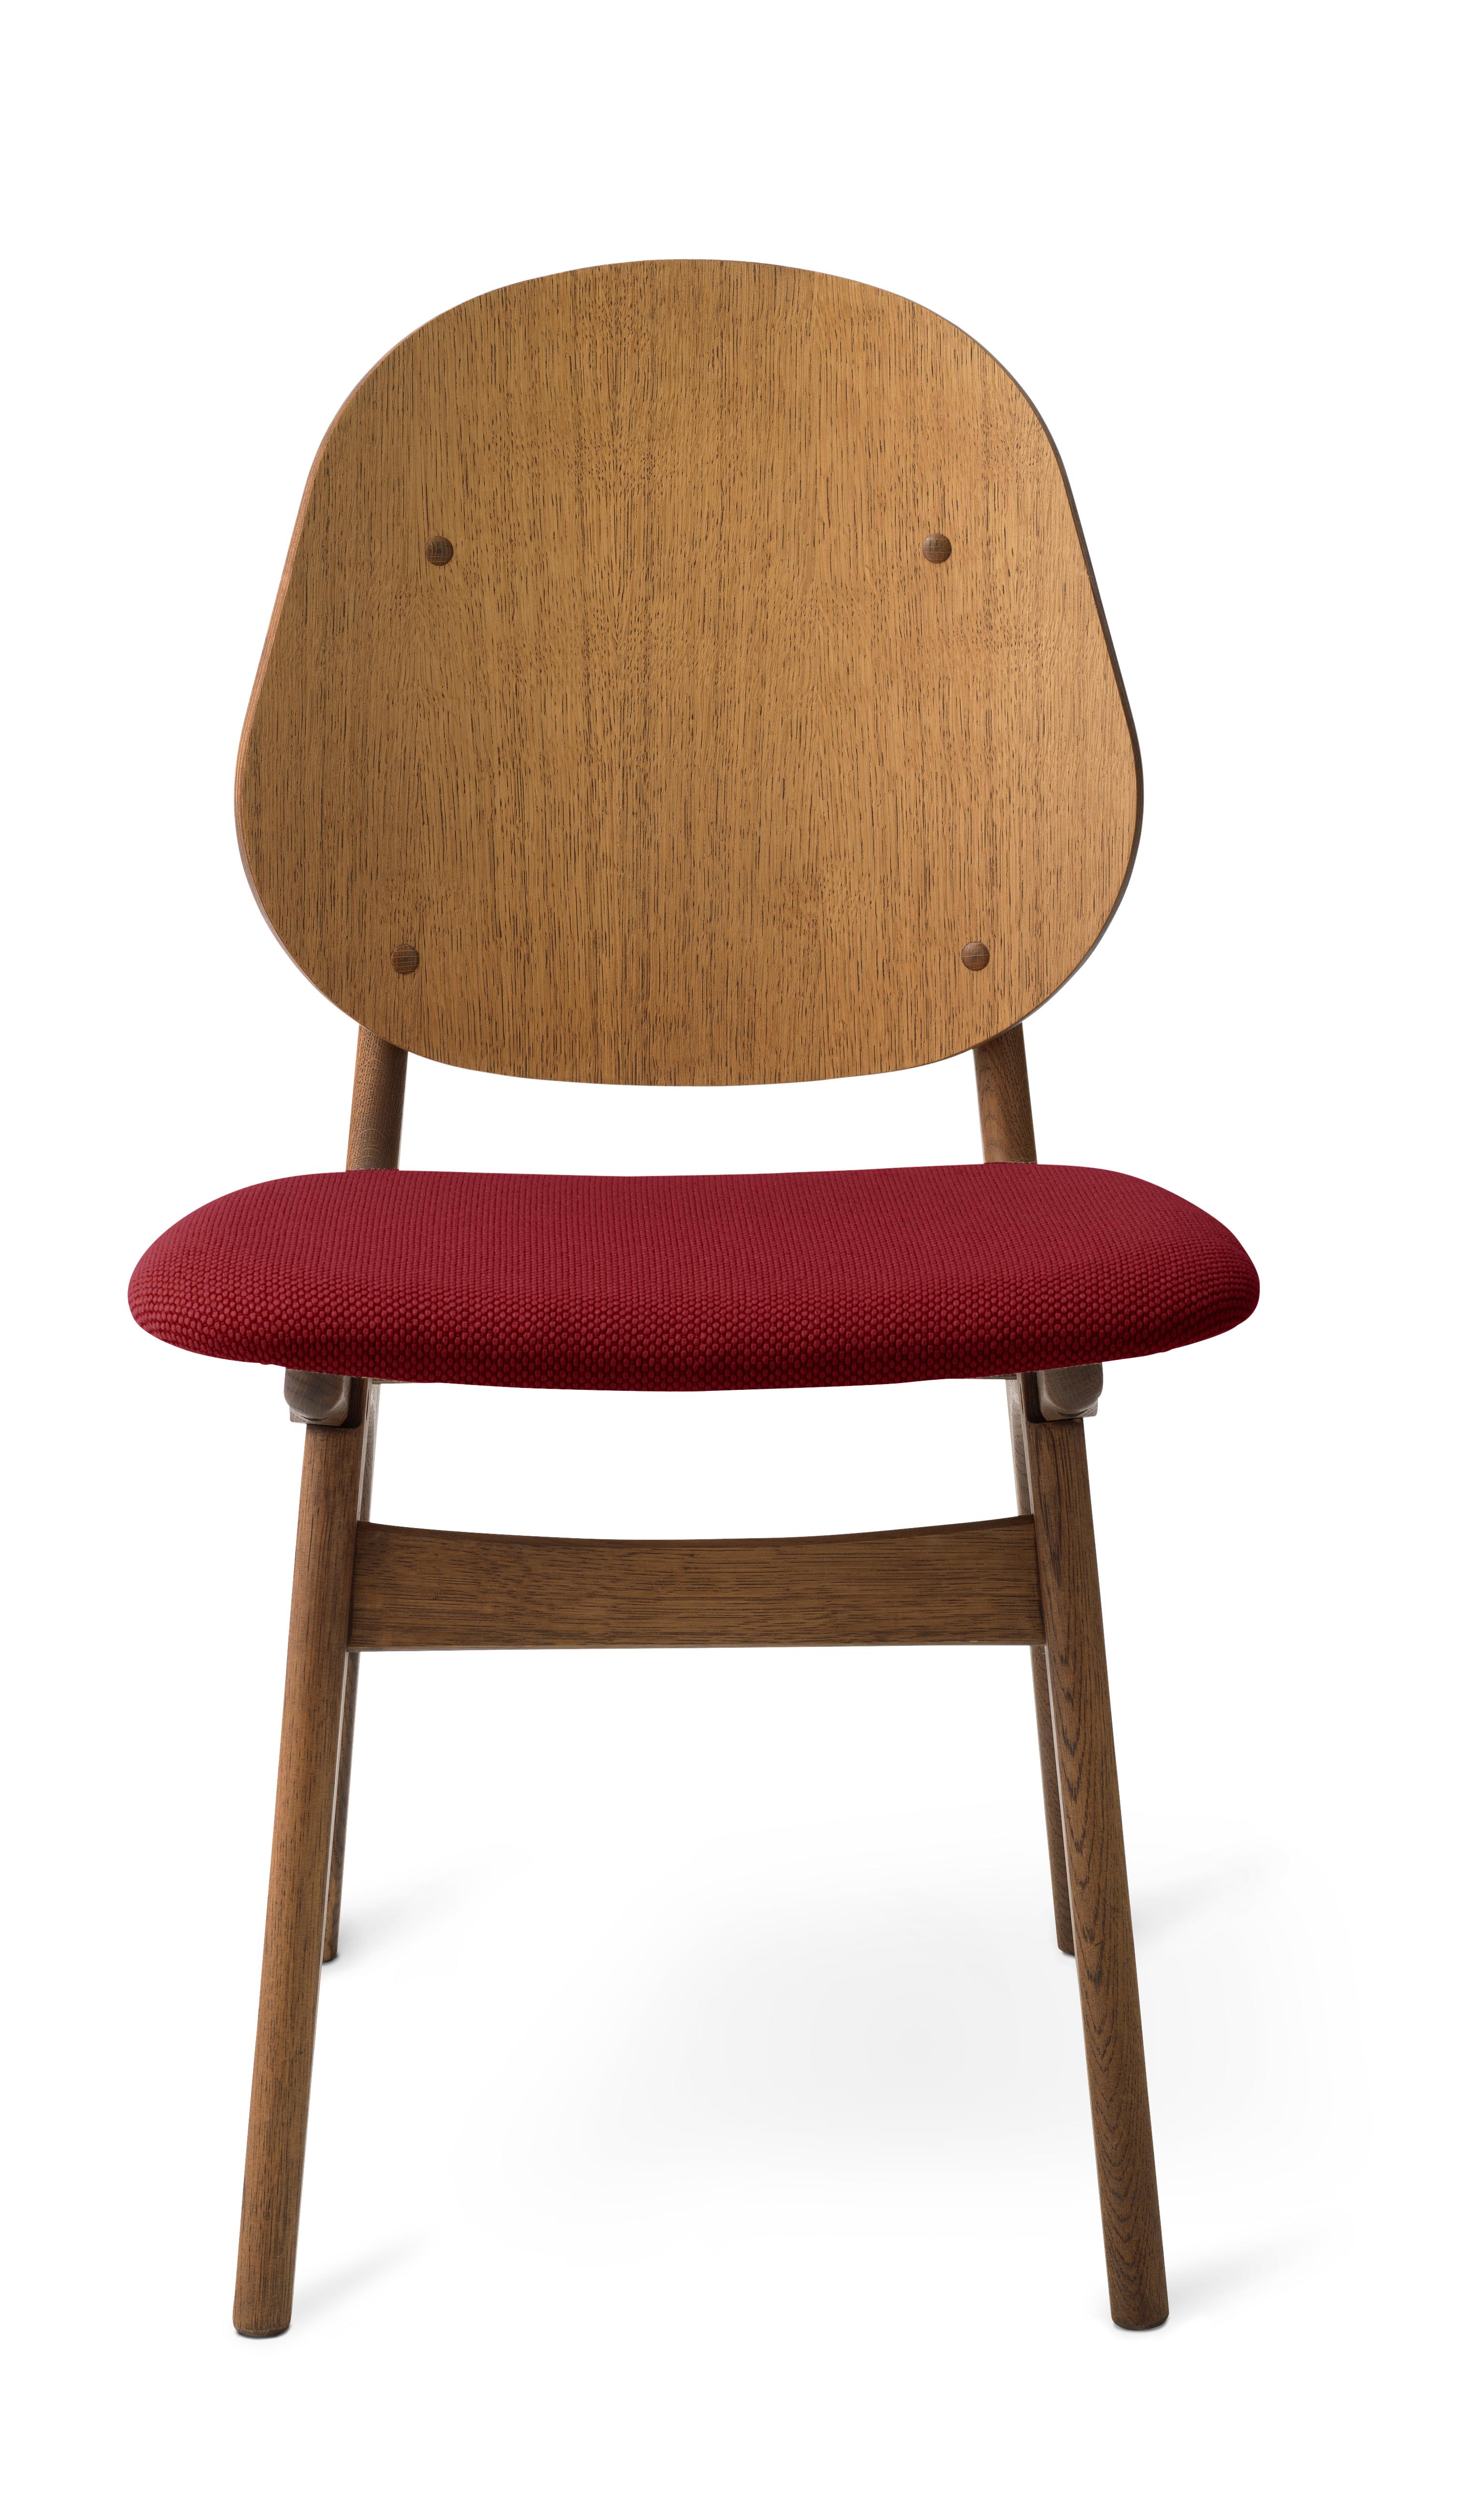 For Sale: Pink (Merit 039) Noble Chair in Teak Oak with Upholstery, by Arne Hovmand-Olsen from Warm Nordic